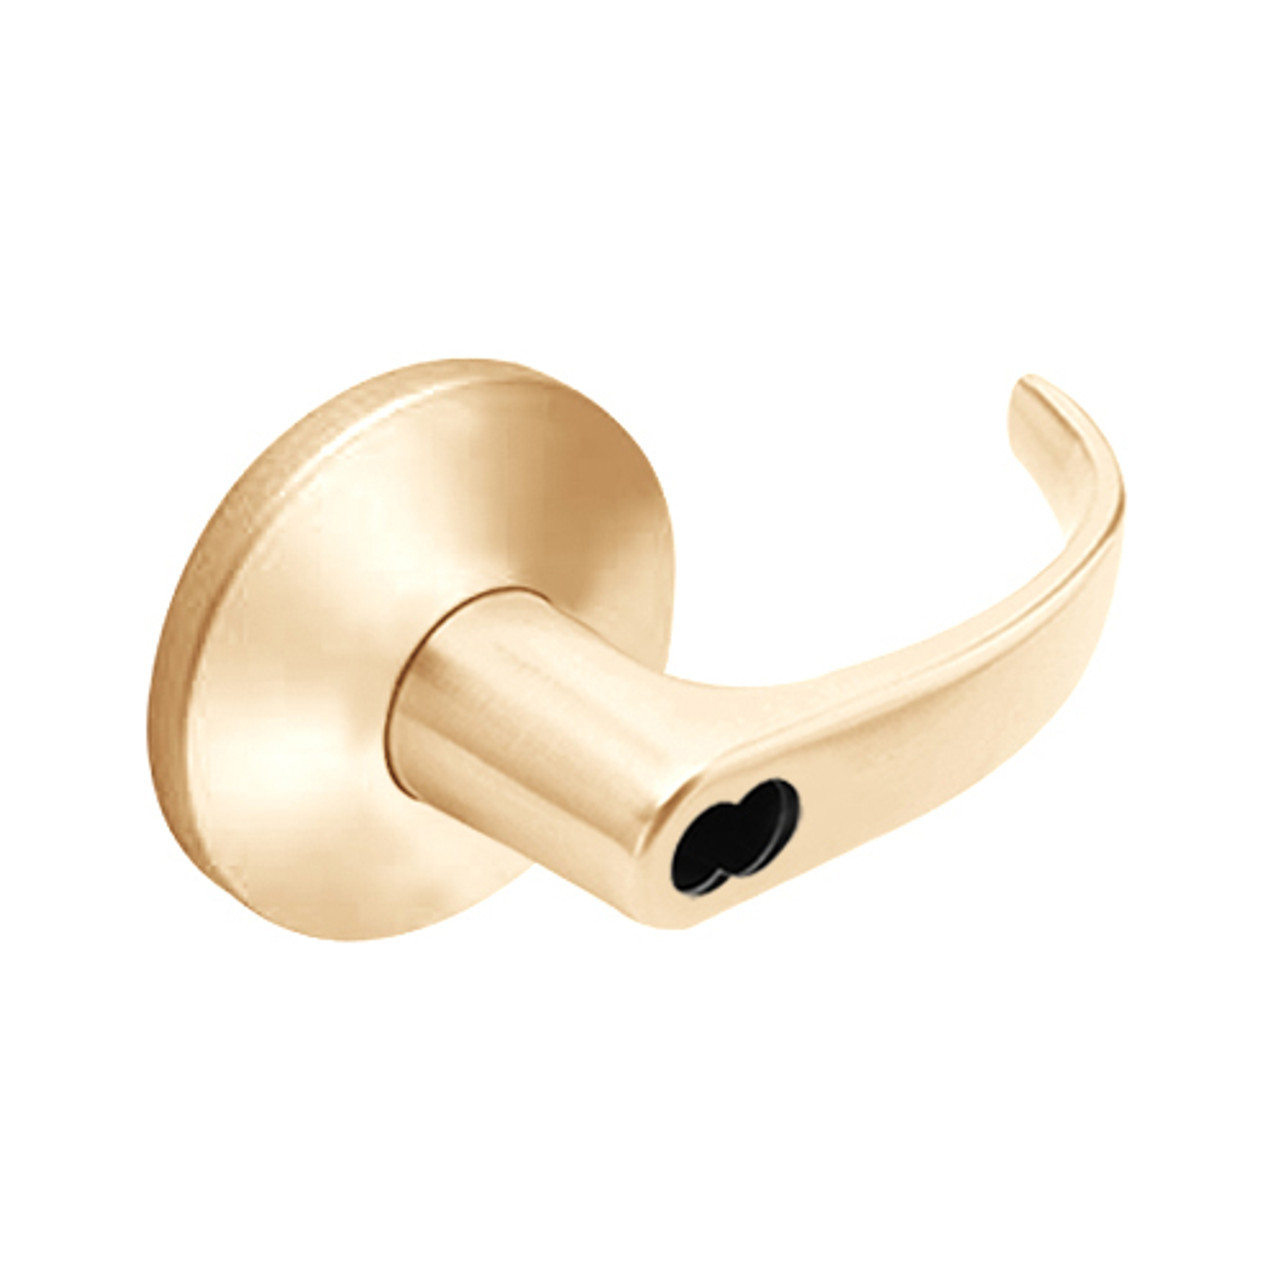 9K47E14LS3611LM Best 9K Series Service Station Cylindrical Lever Locks with Curved with Return Lever Design Accept 7 Pin Best Core in Bright Bronze